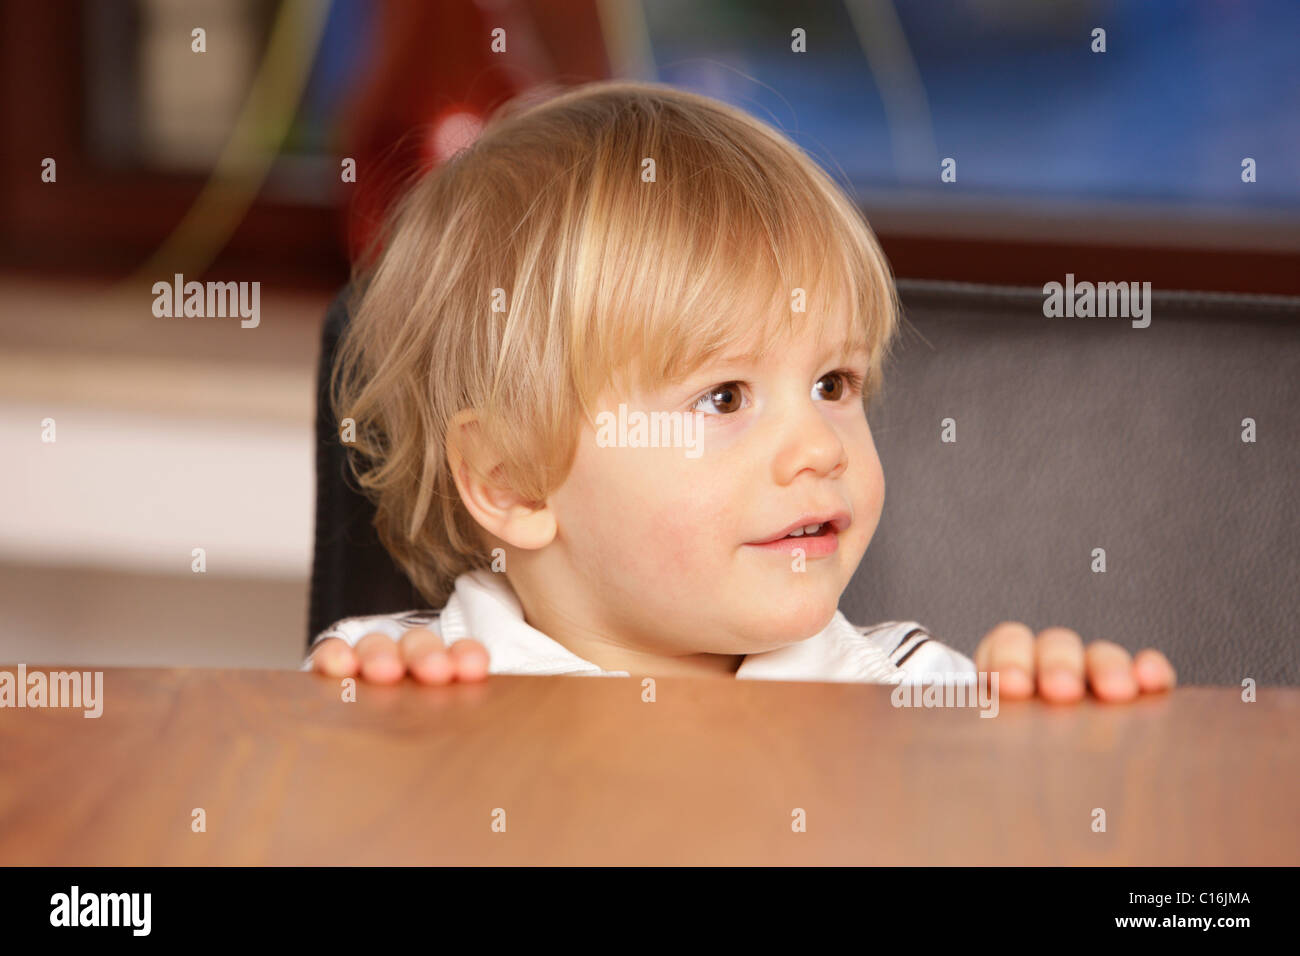 2 year old boy at the edge of the table Stock Photo